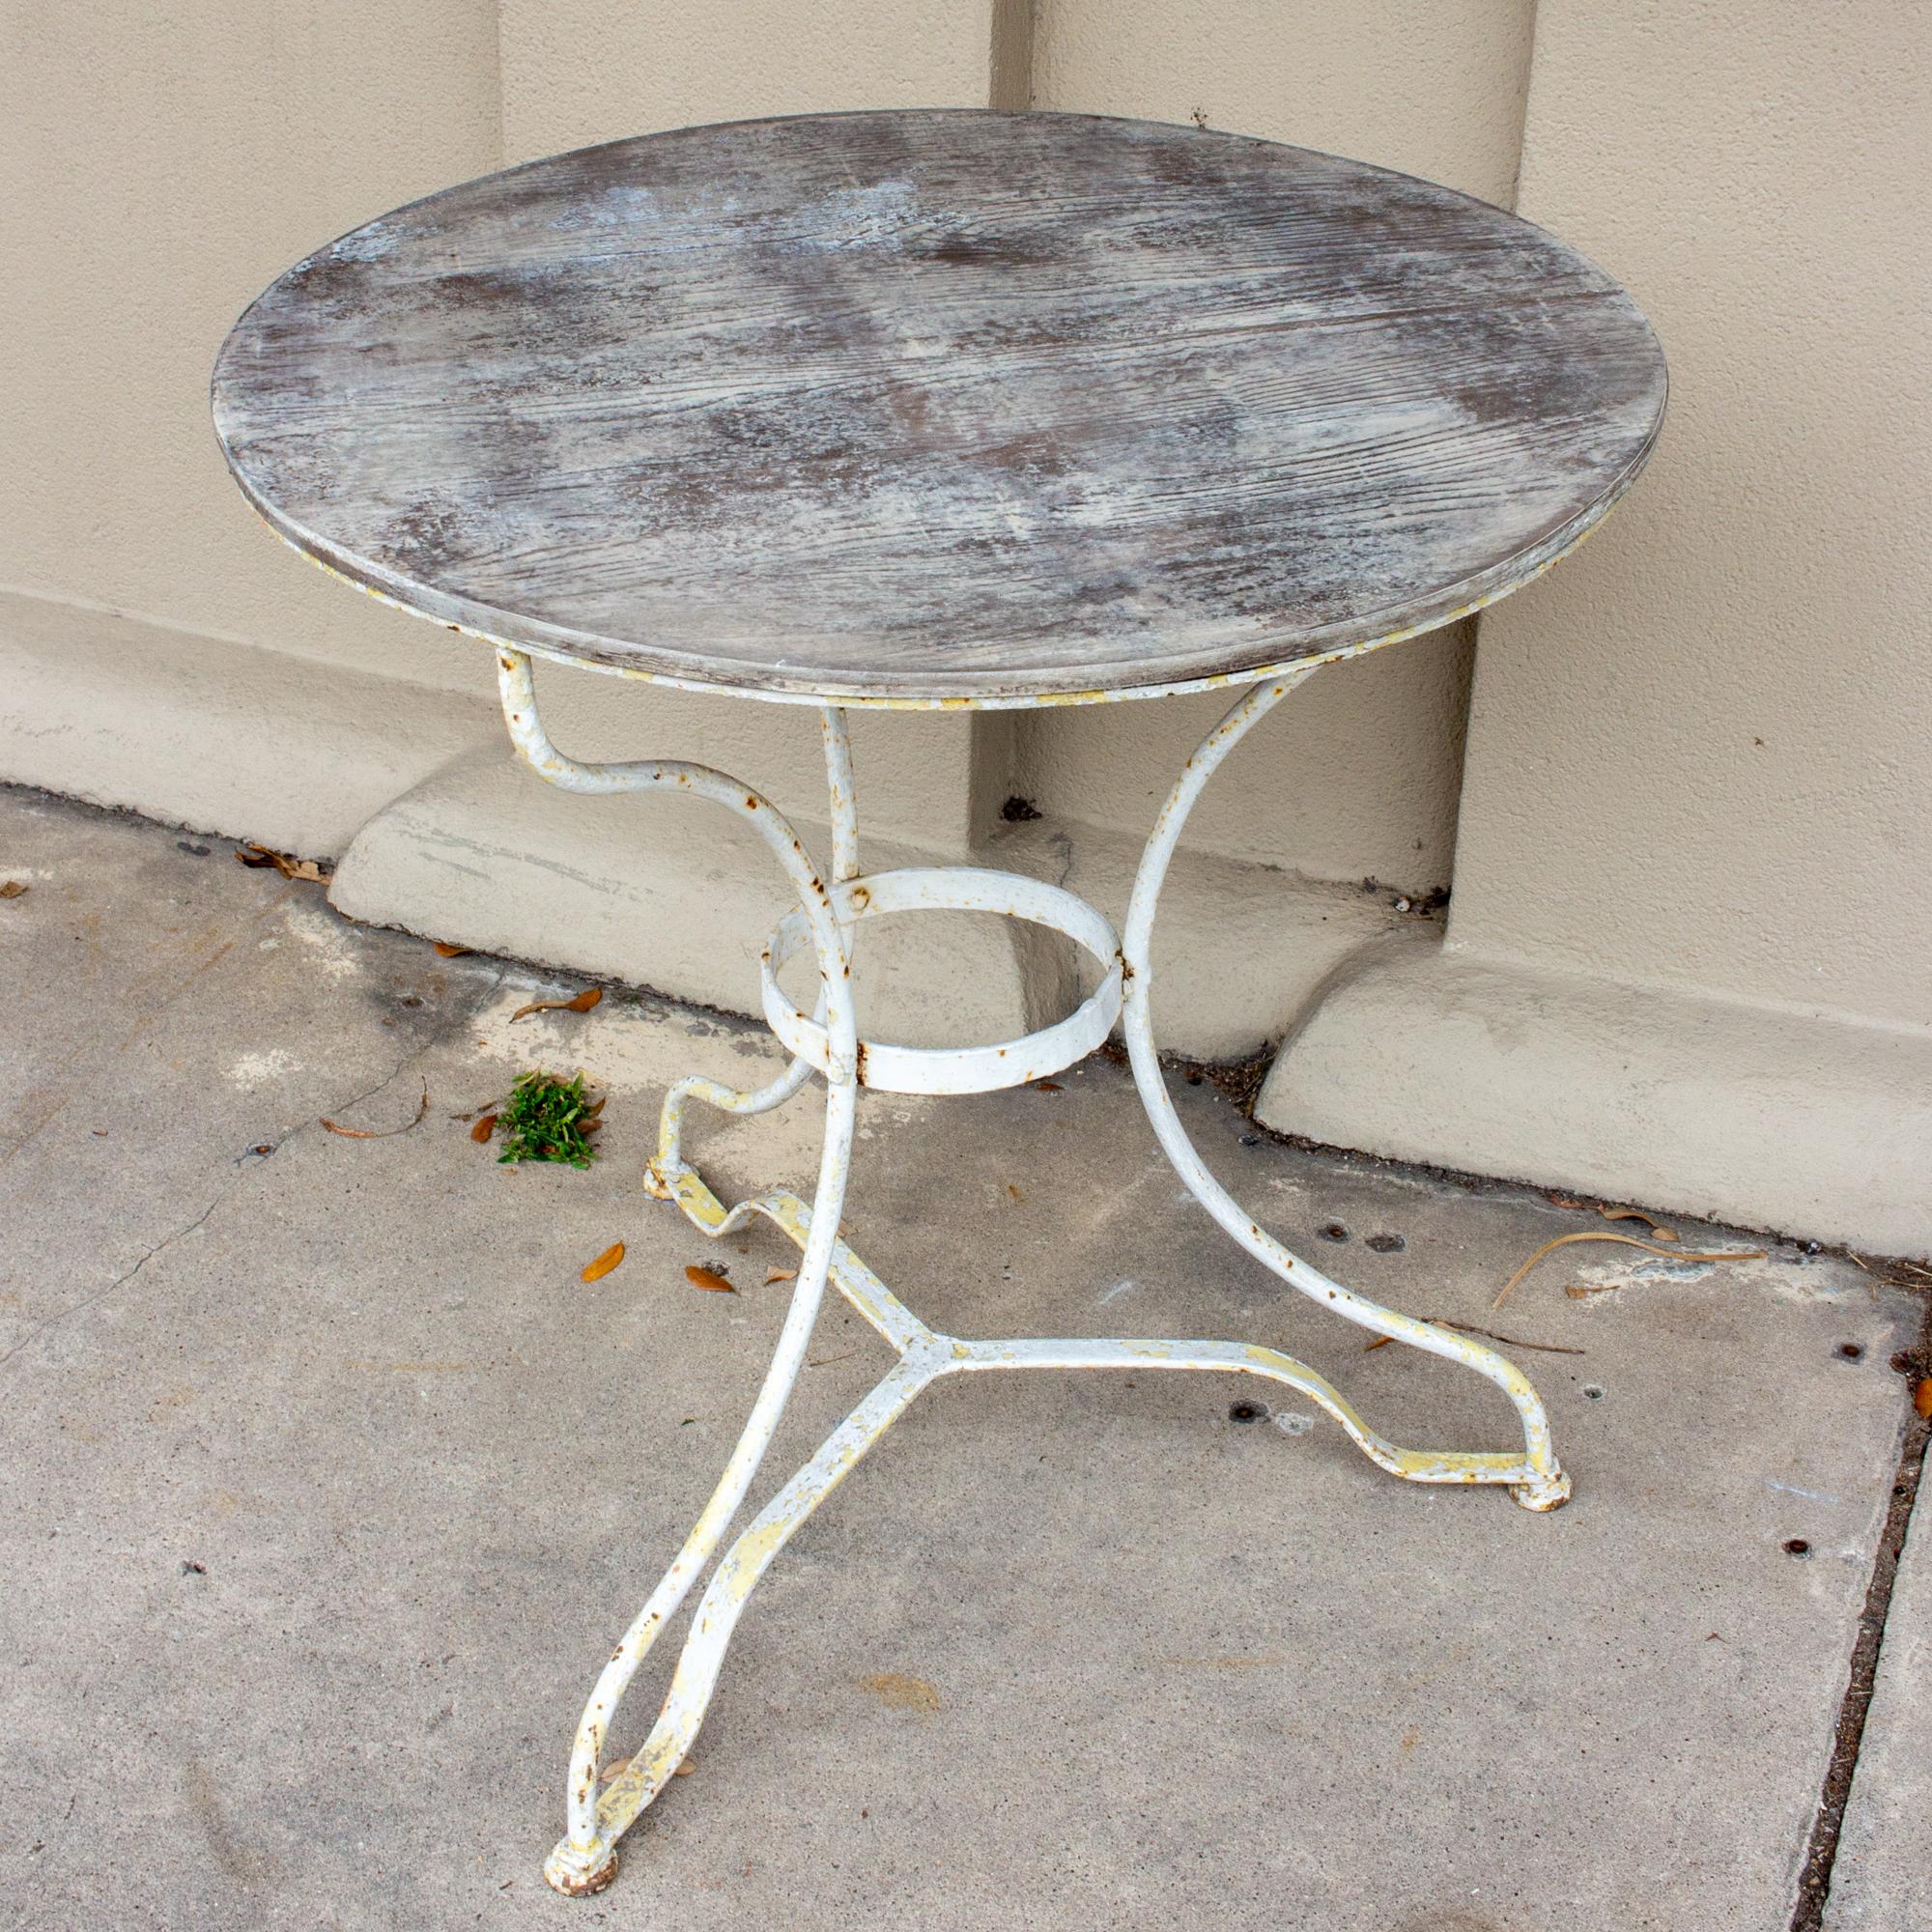 Hand-Painted Antique French Painted Iron Bistro Table with Wood Top in Greige